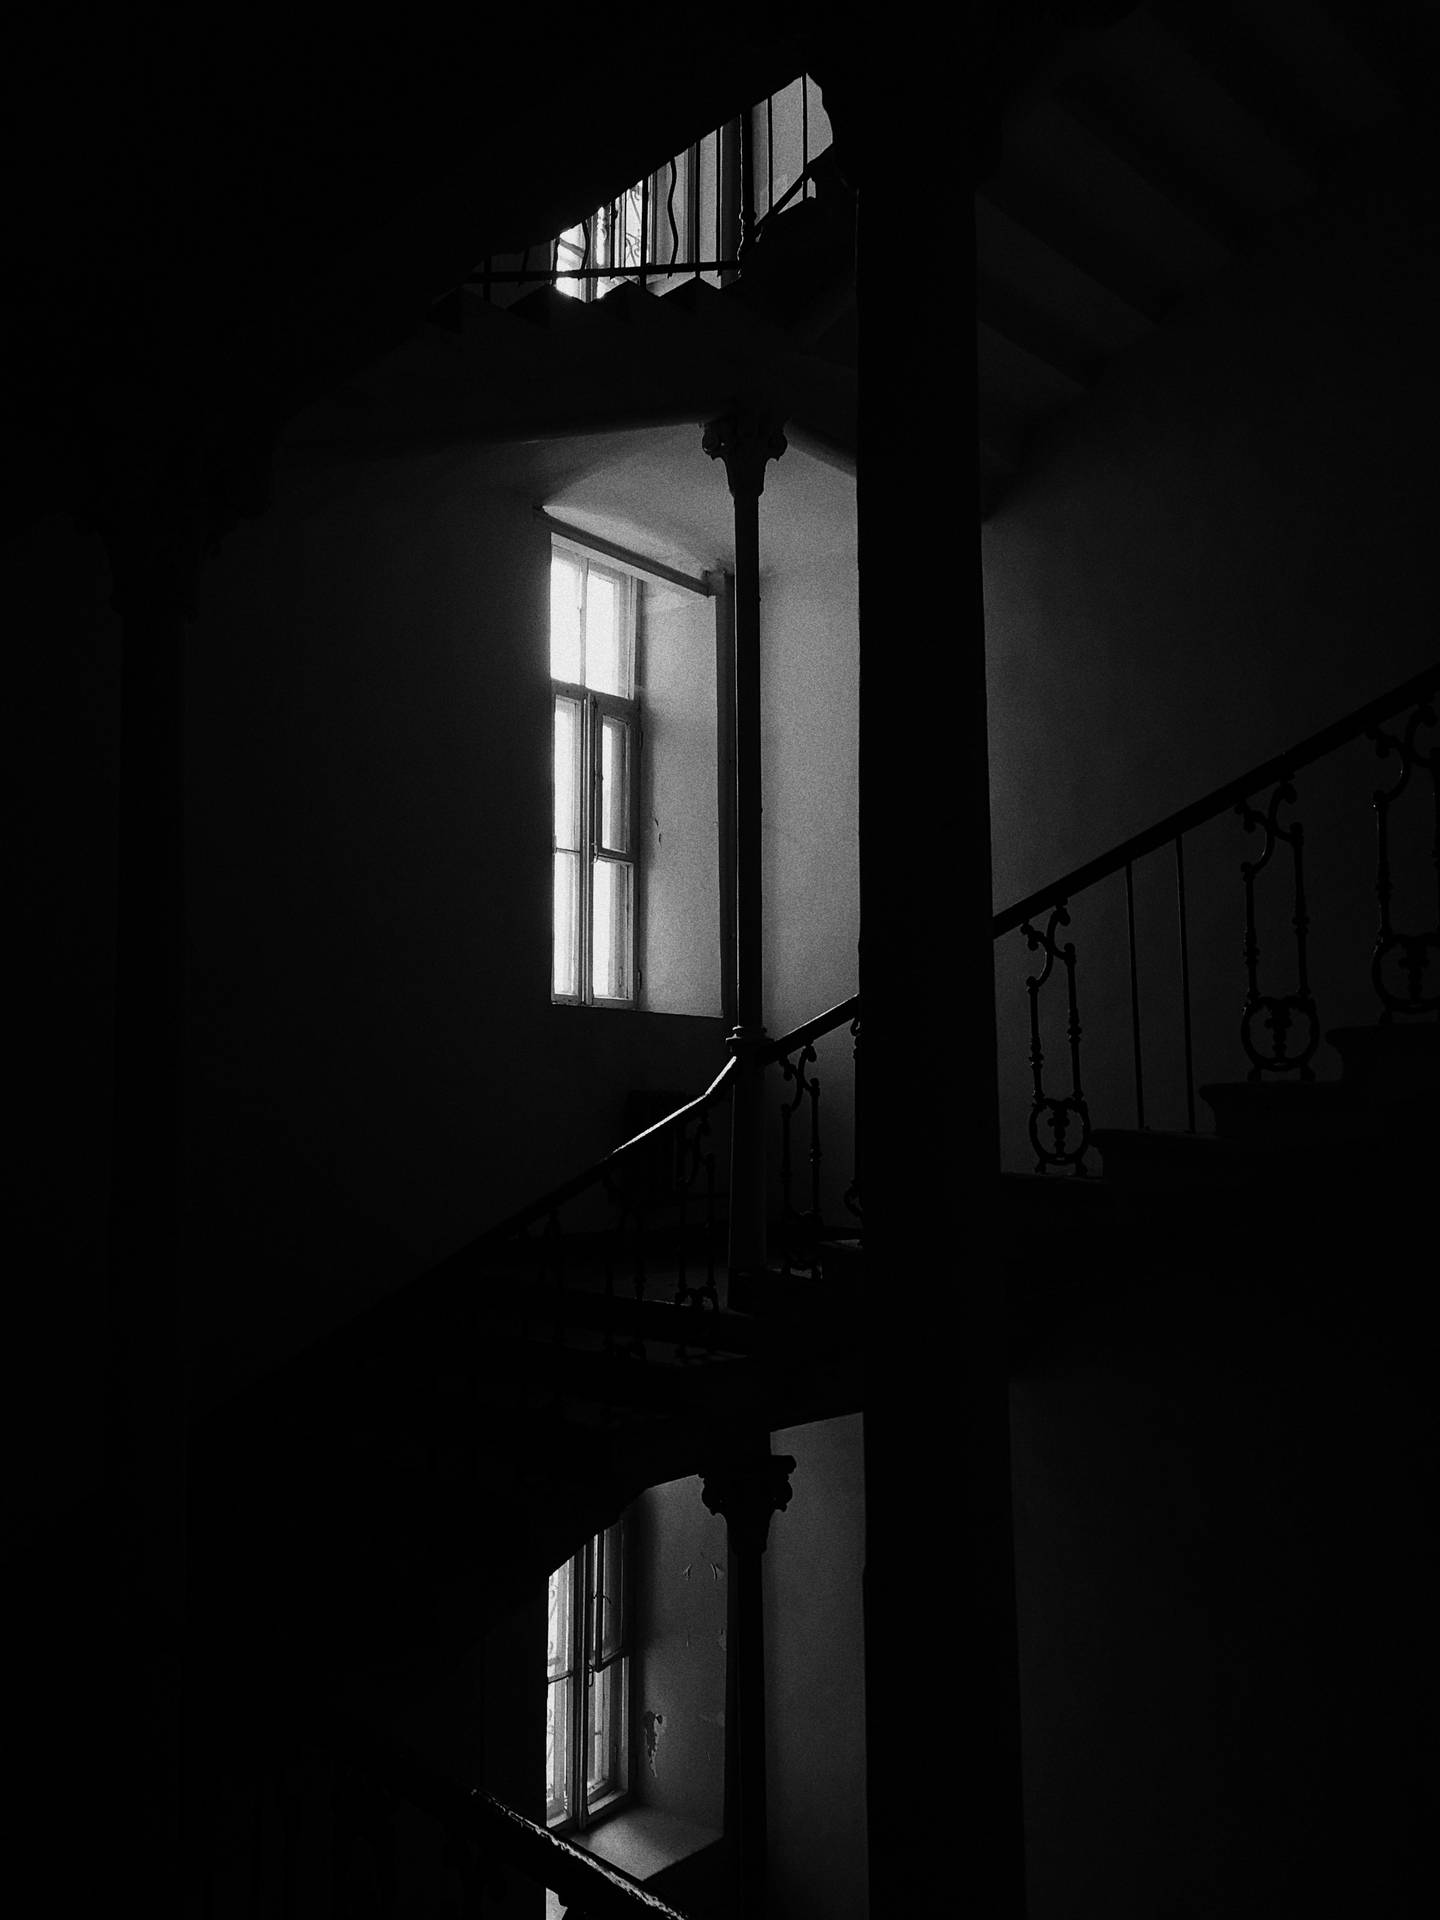 Mysterious Atmosphere In A Dark-themed Interior Background